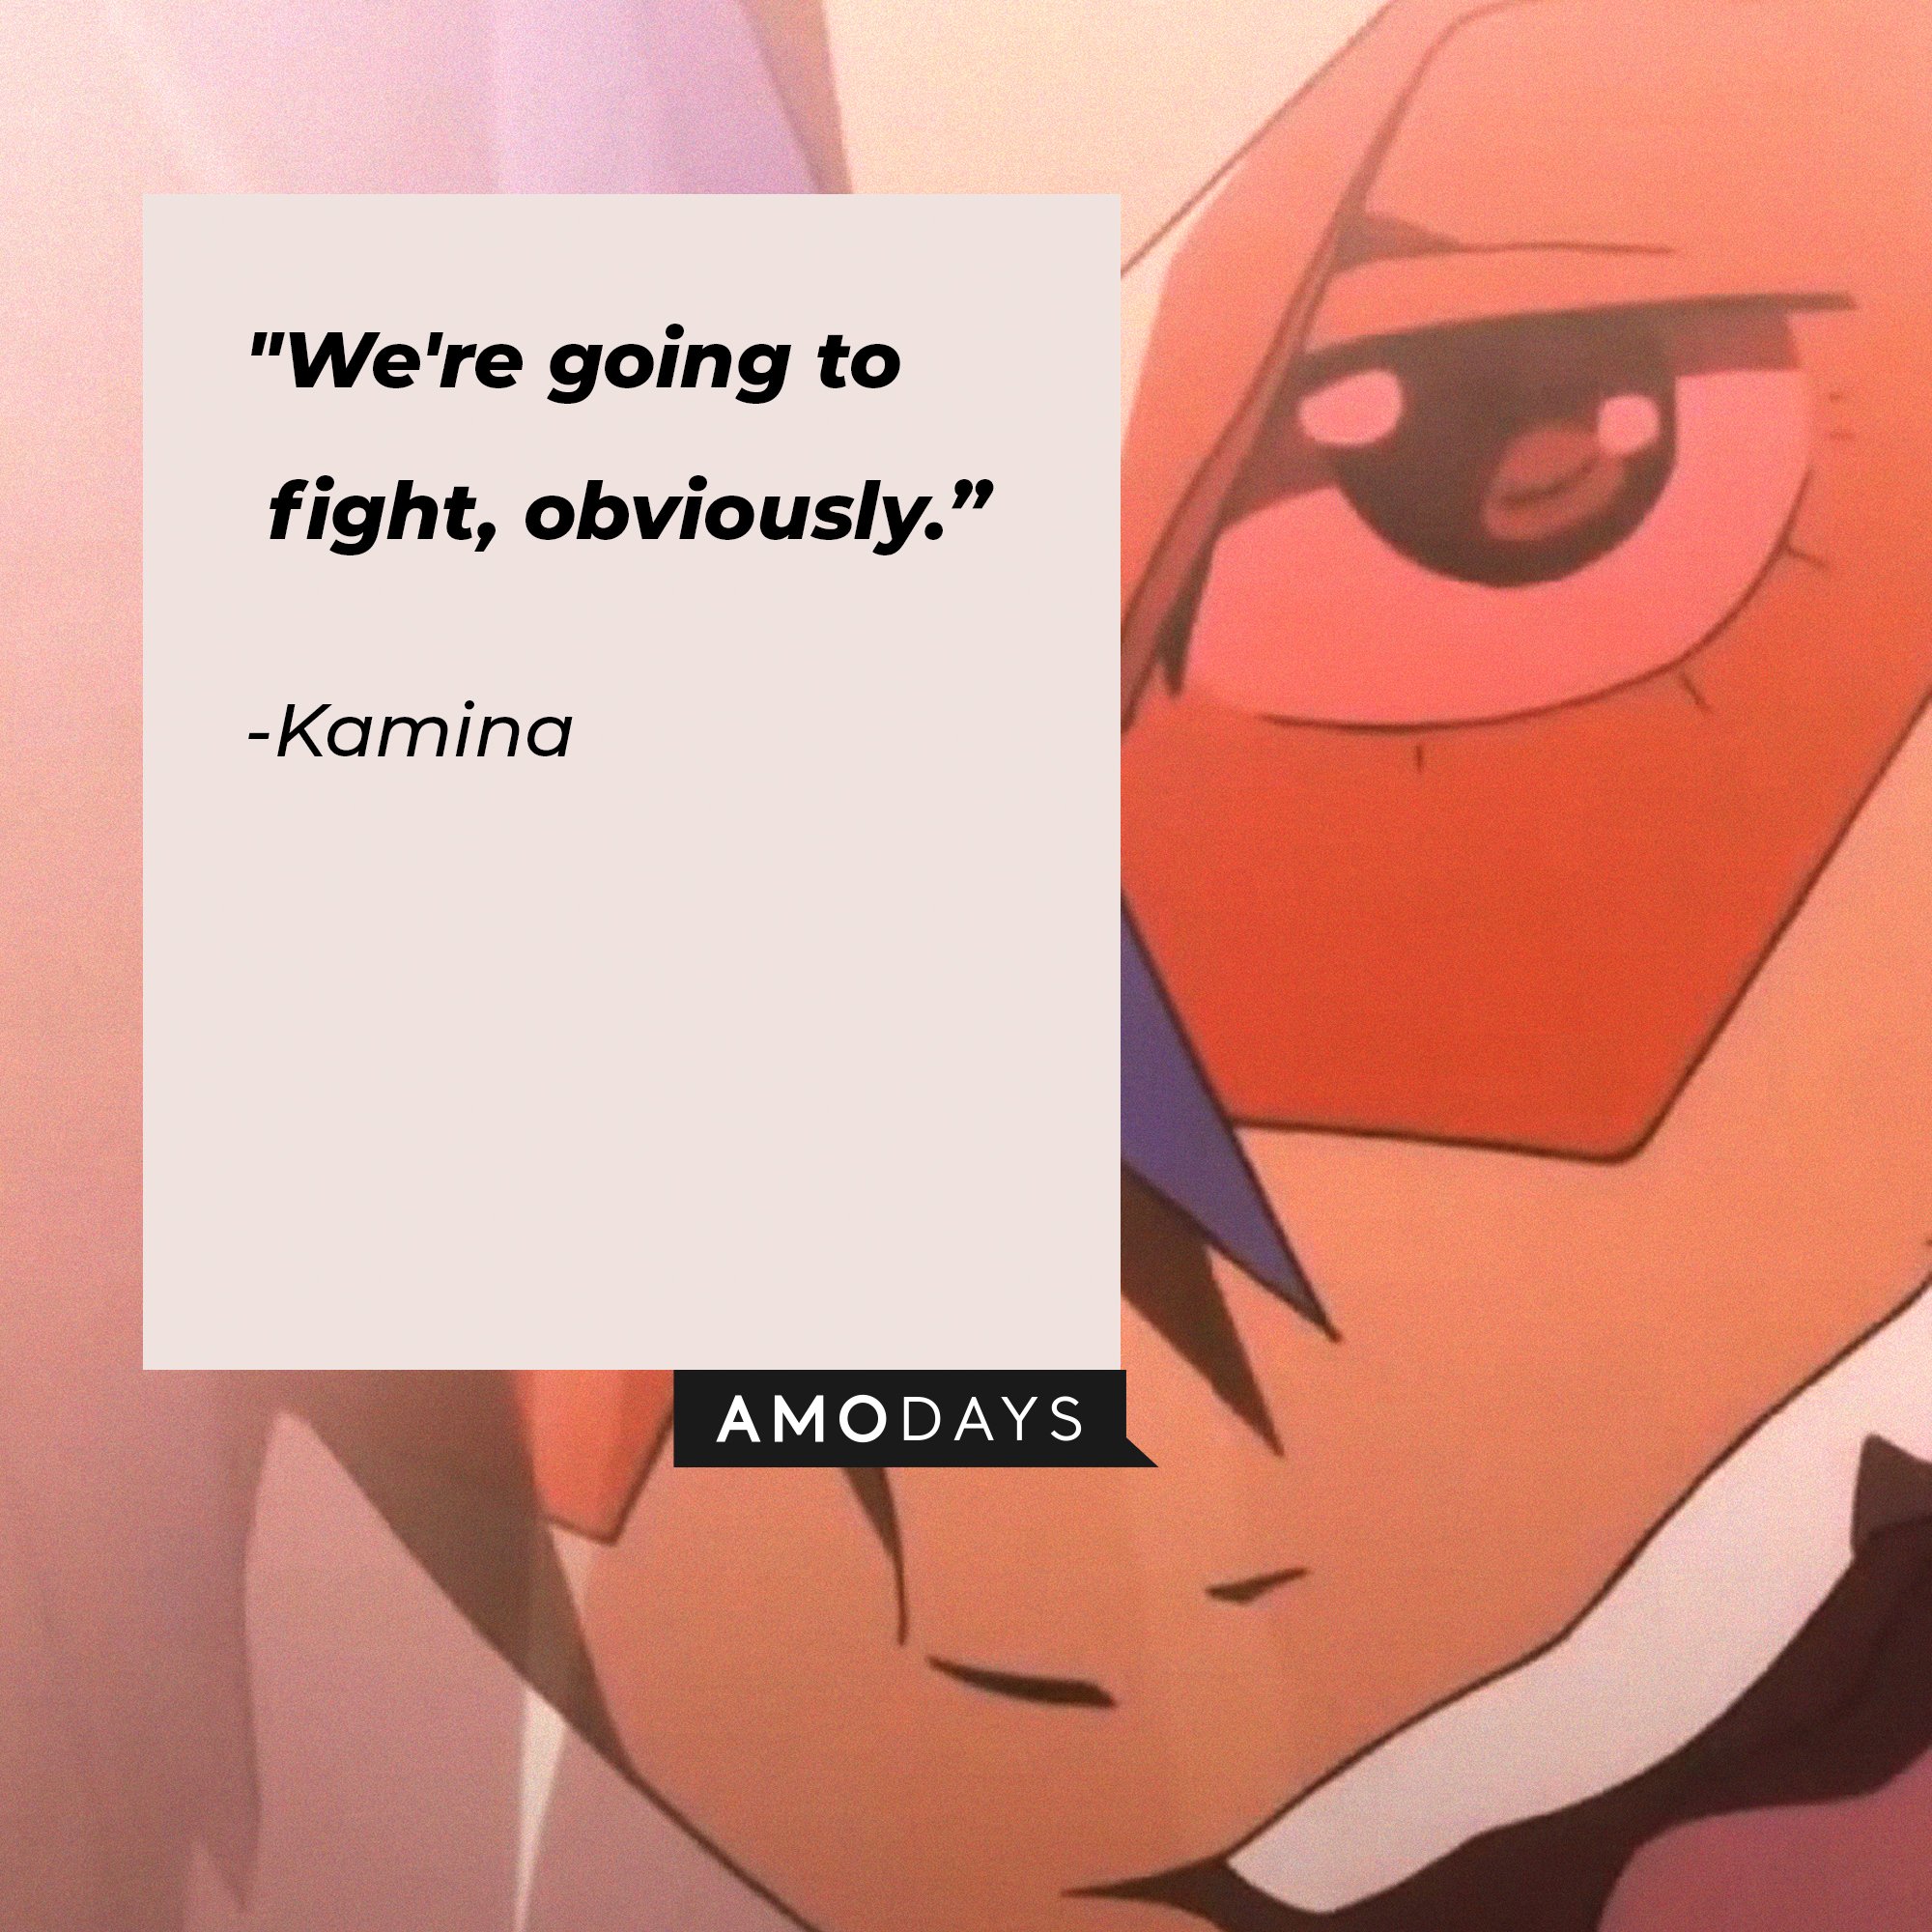 Kamina's quote: "We're going to fight, obviously.” | Image: AmoDays   